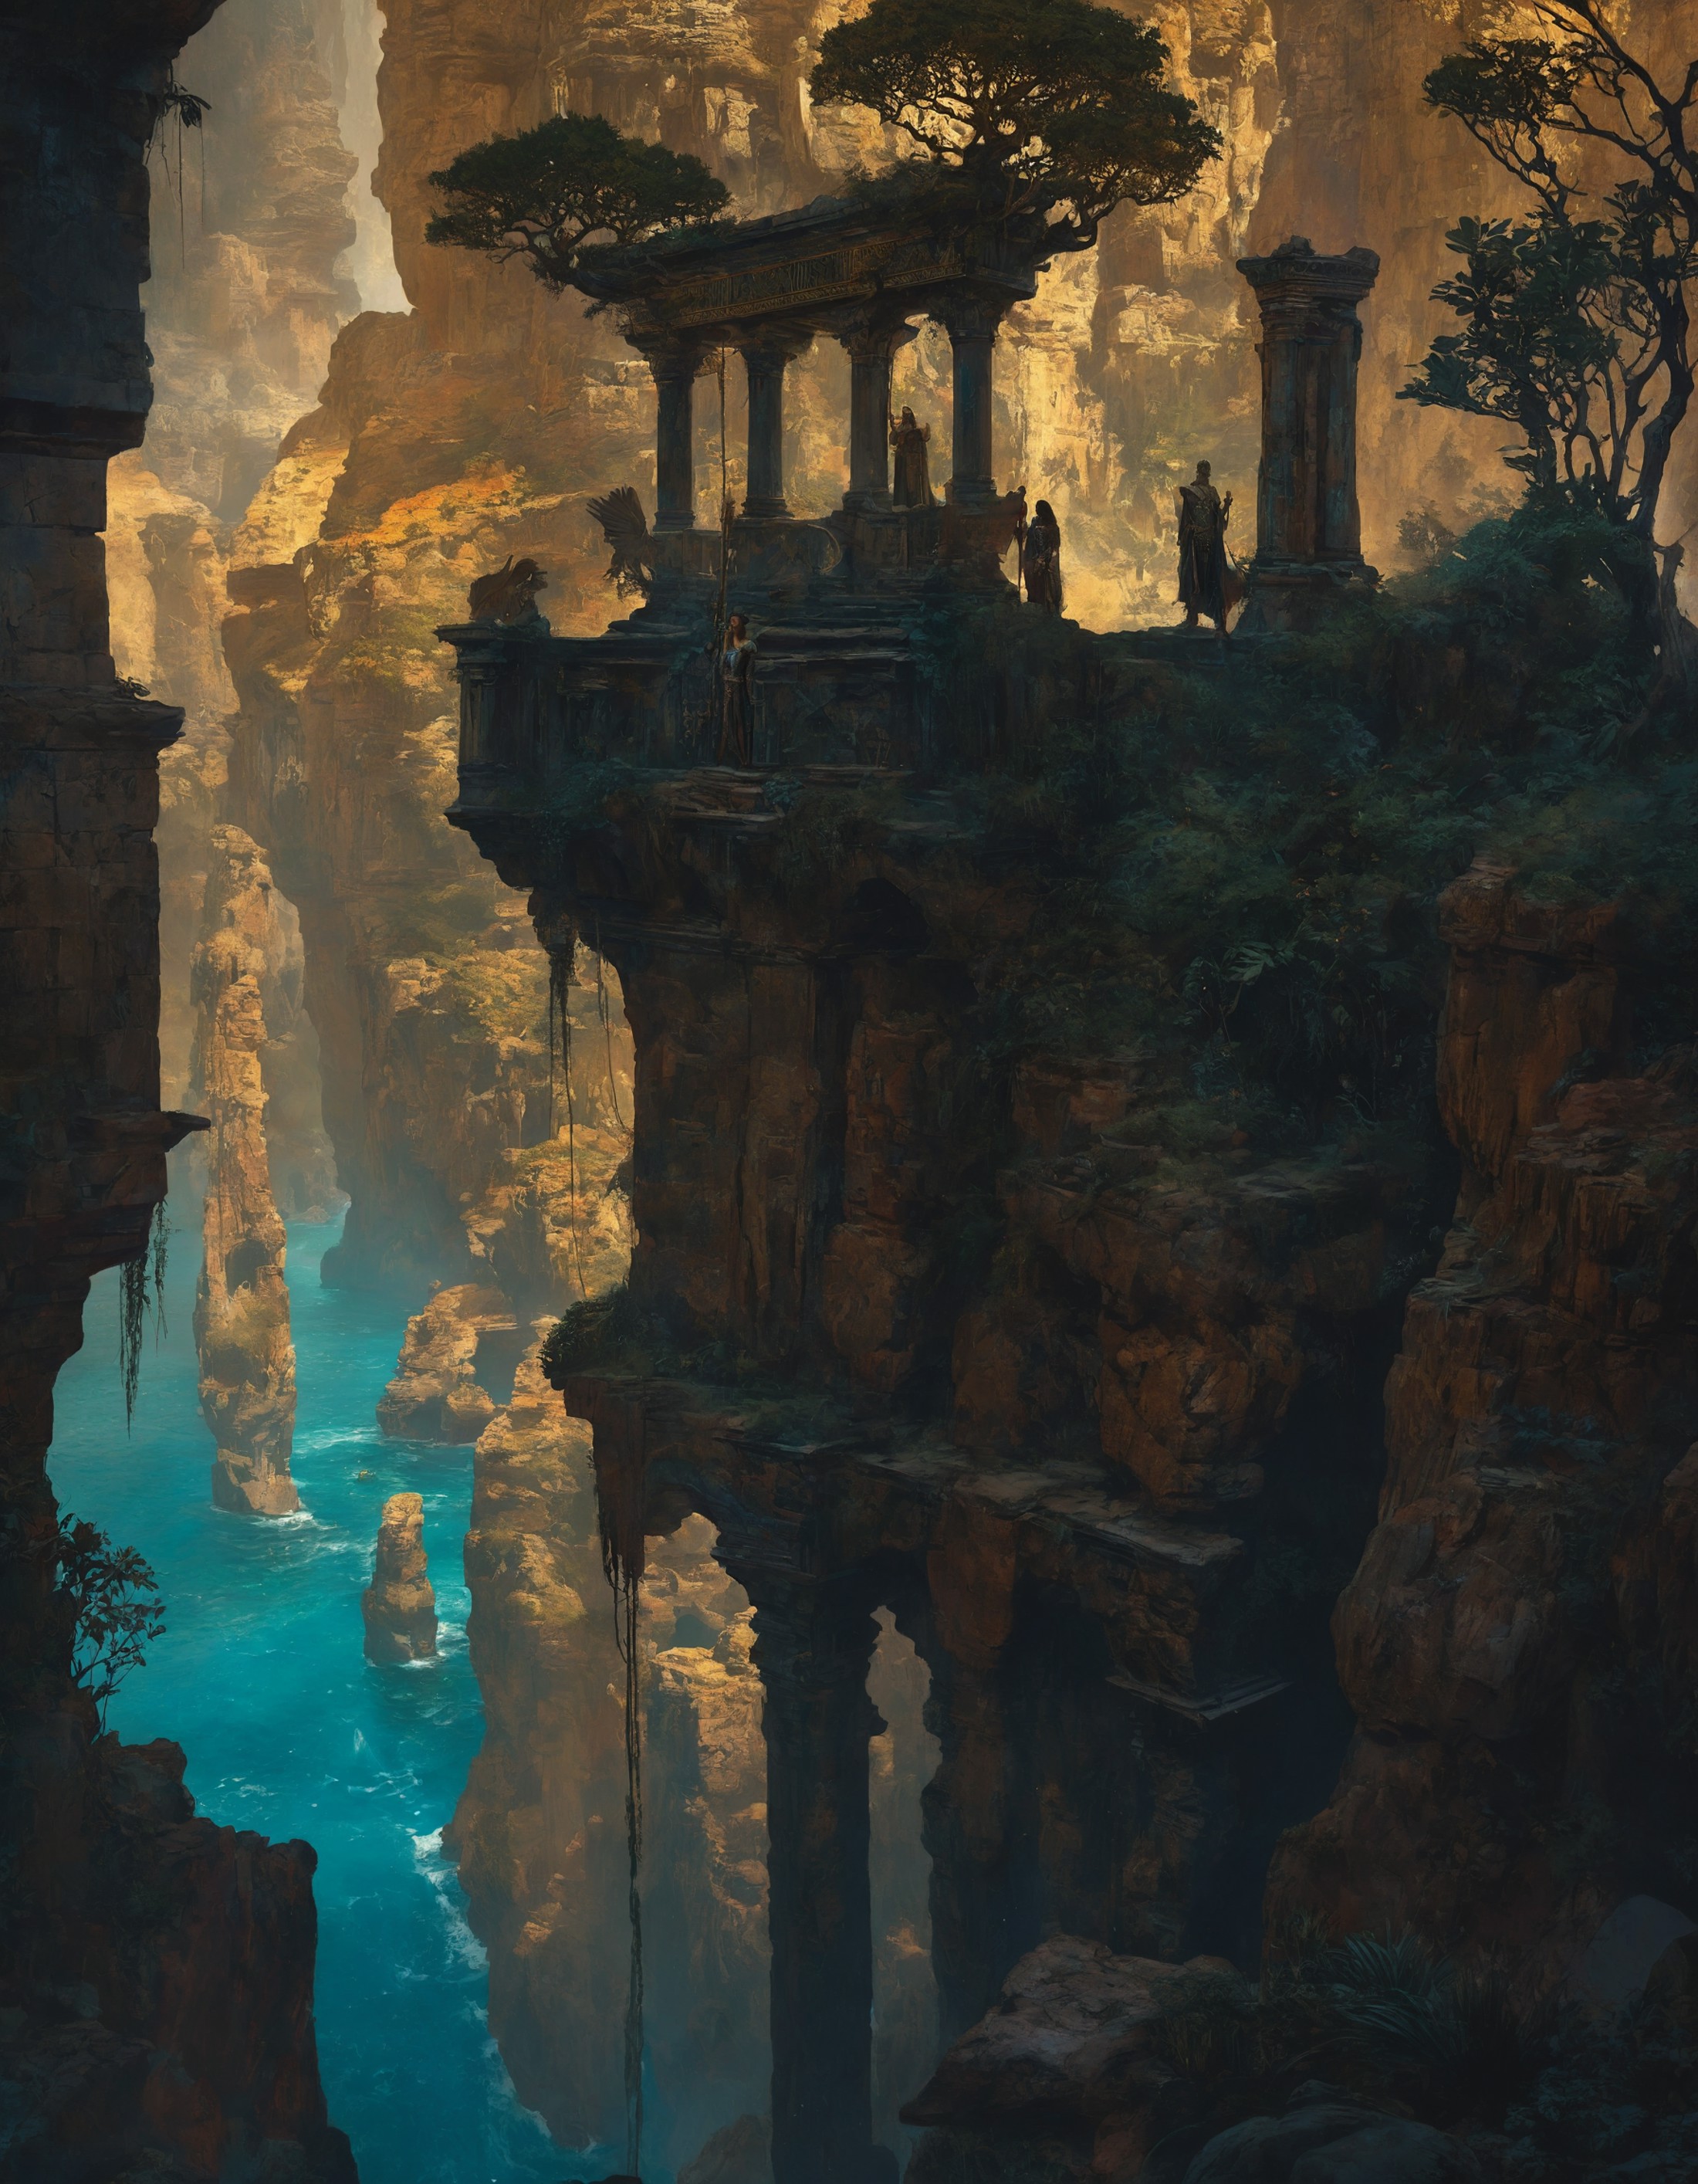 A group of shaded figures stand atop a towering rock formation host to ancient ruins, featuring columns with greenery accenting the stone structures and cliff faces. In the background, a tranquil body of water at the base of the cliffs reflects the sun's rays, enhancing the overall majesty and mystery of the setting. 